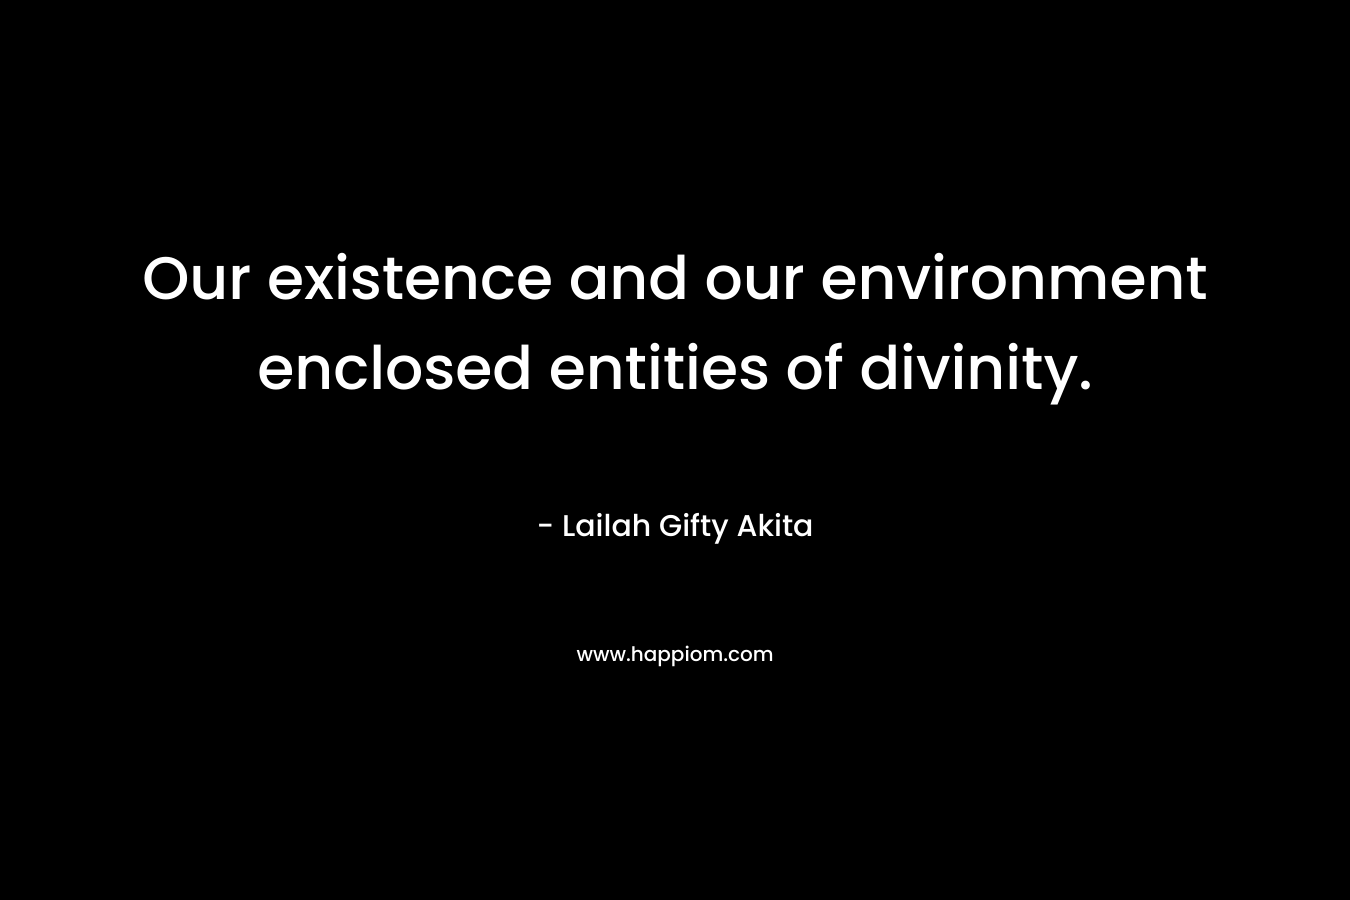 Our existence and our environment enclosed entities of divinity. – Lailah Gifty Akita